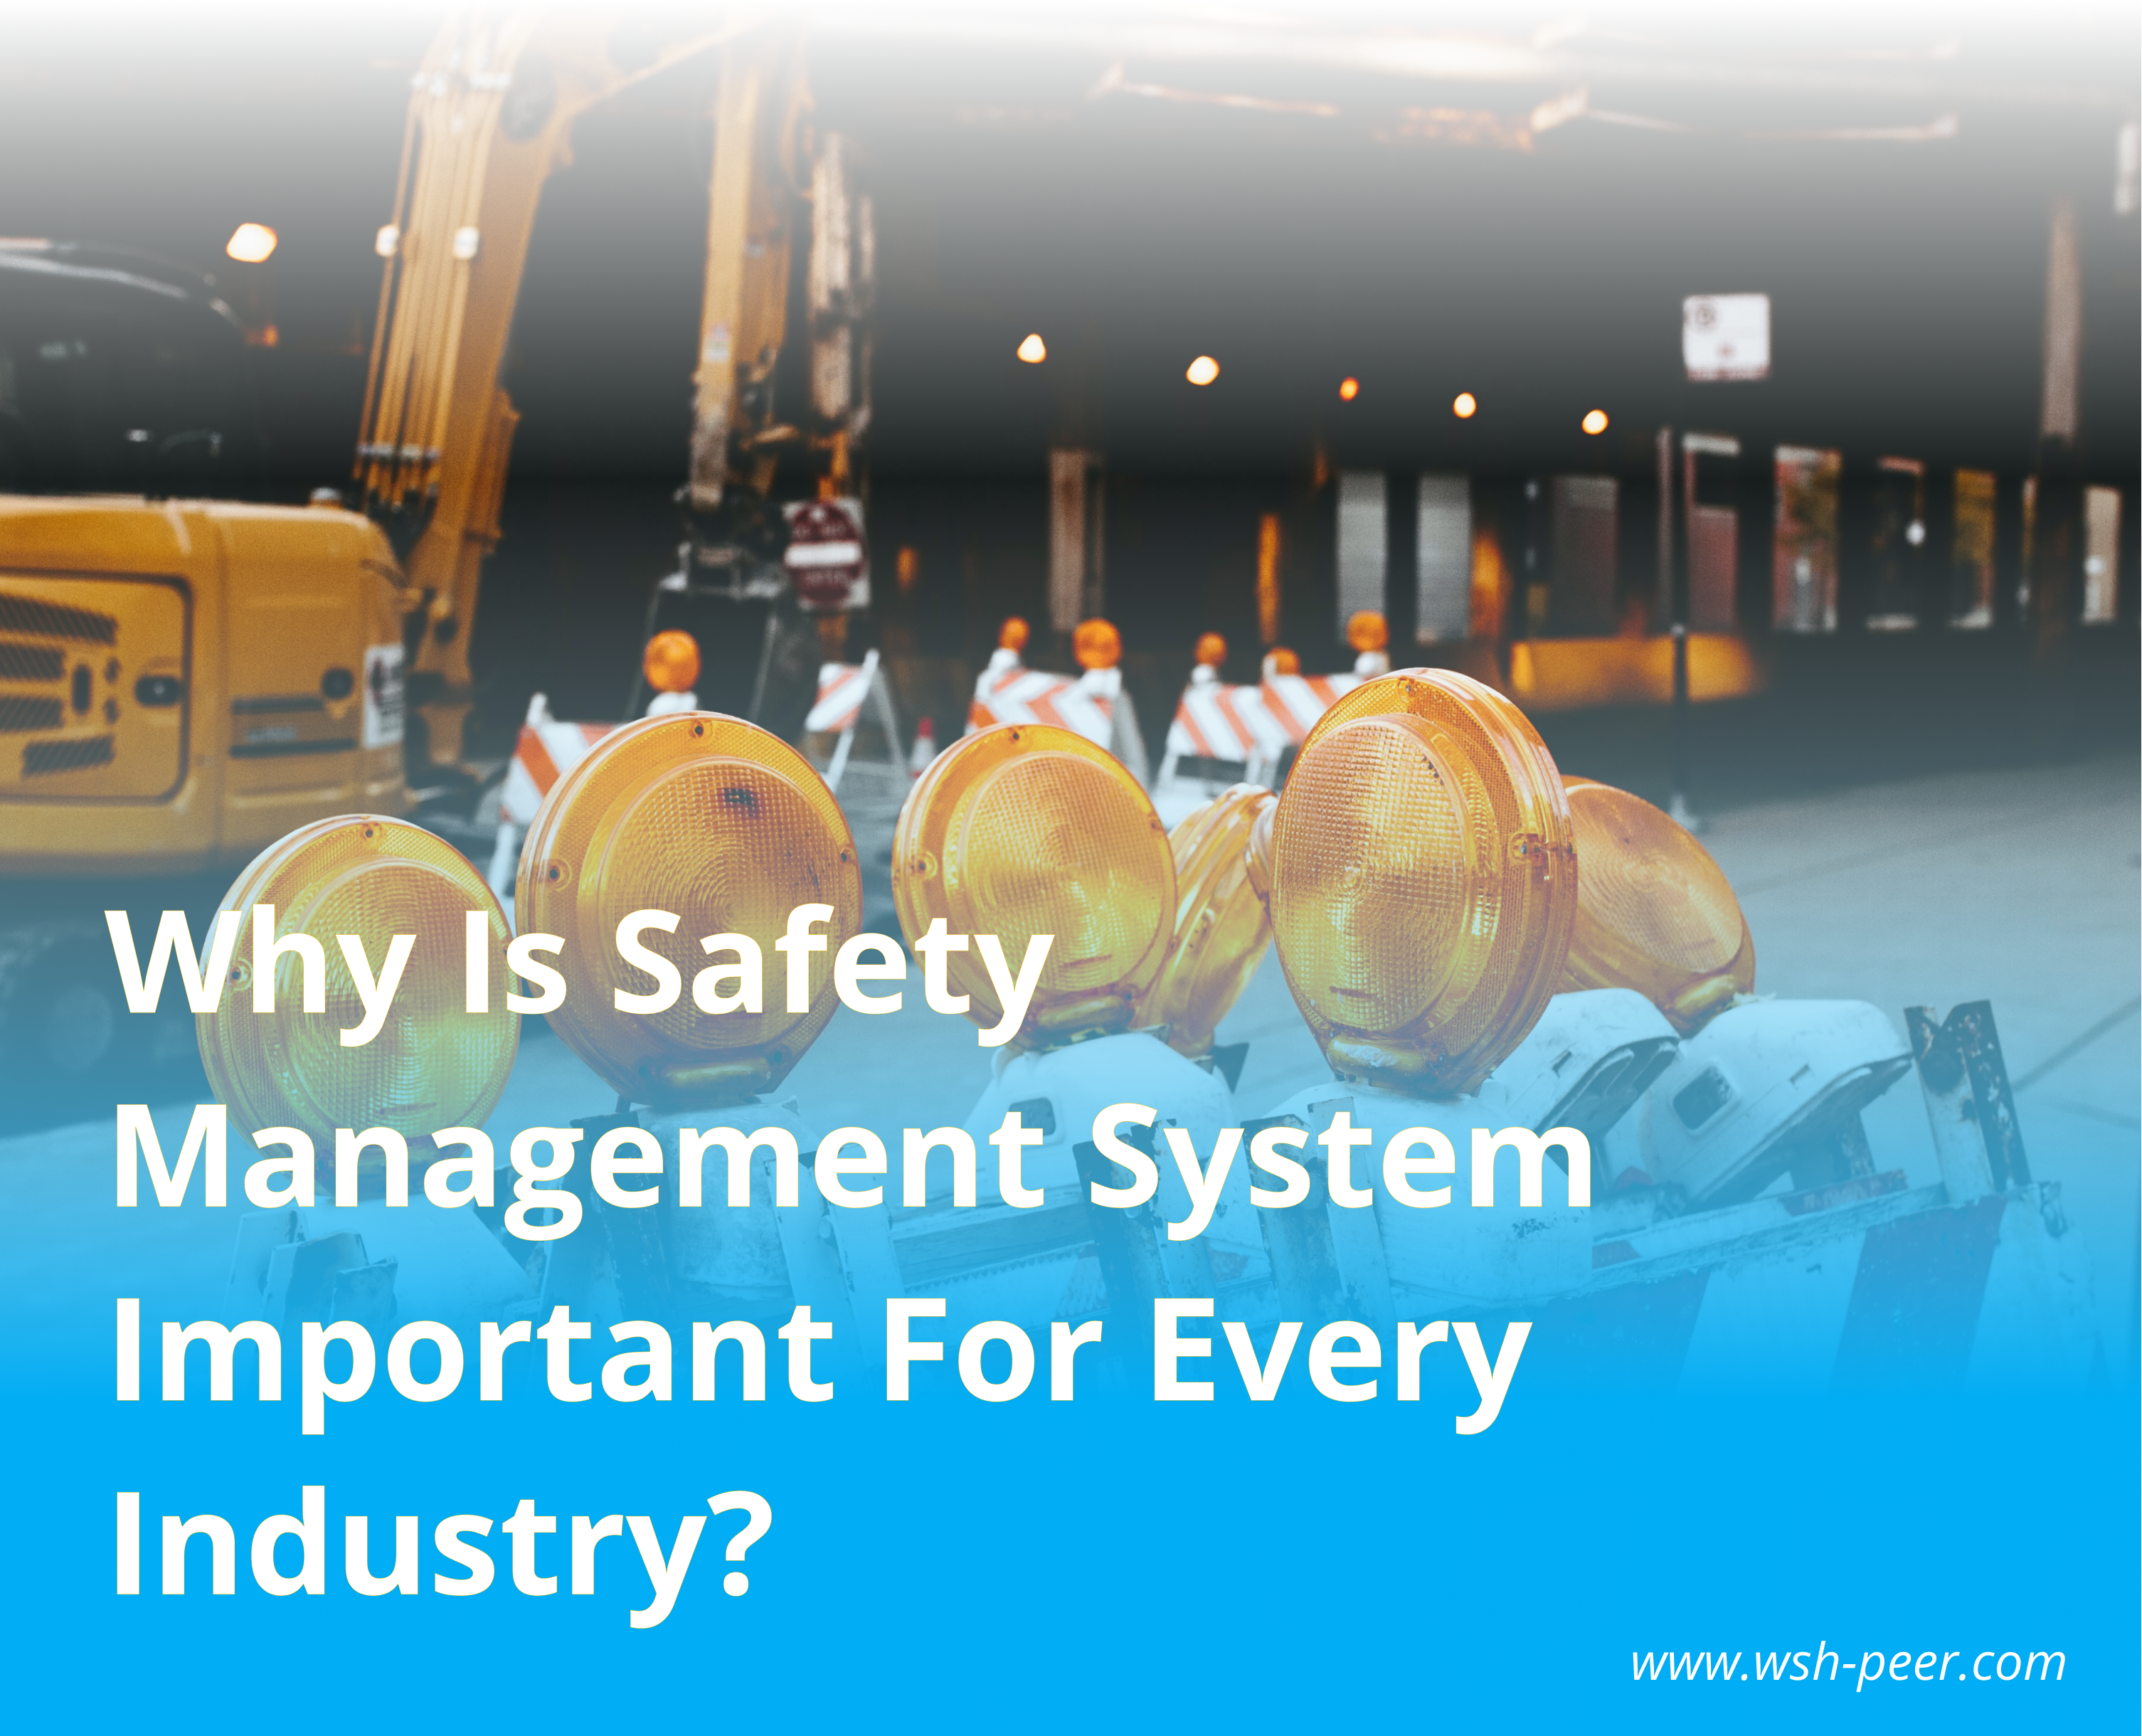 Why Is Safety Management System Important In Every Industry?